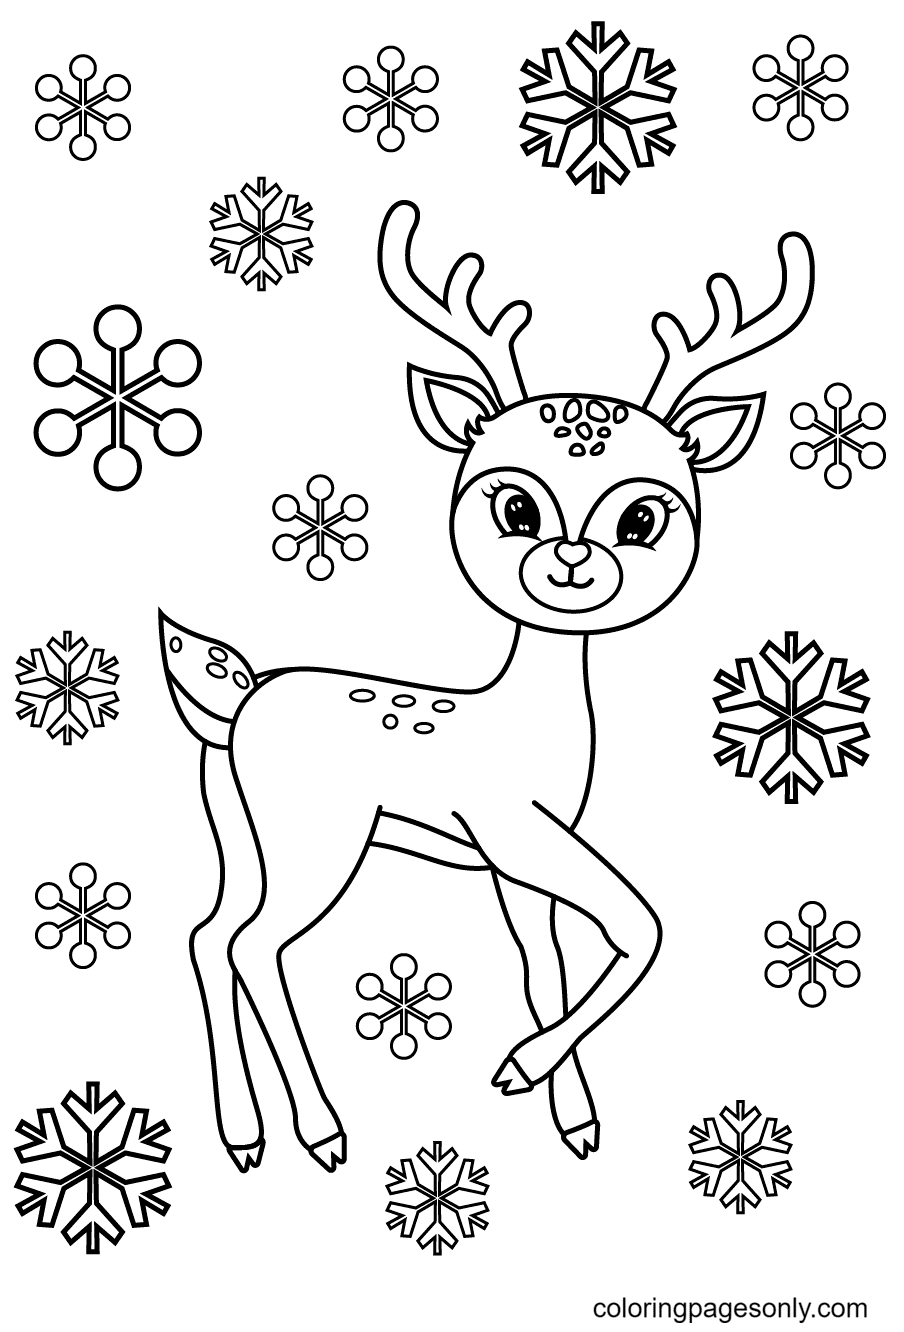 Reindeer coloring pages printable for free download